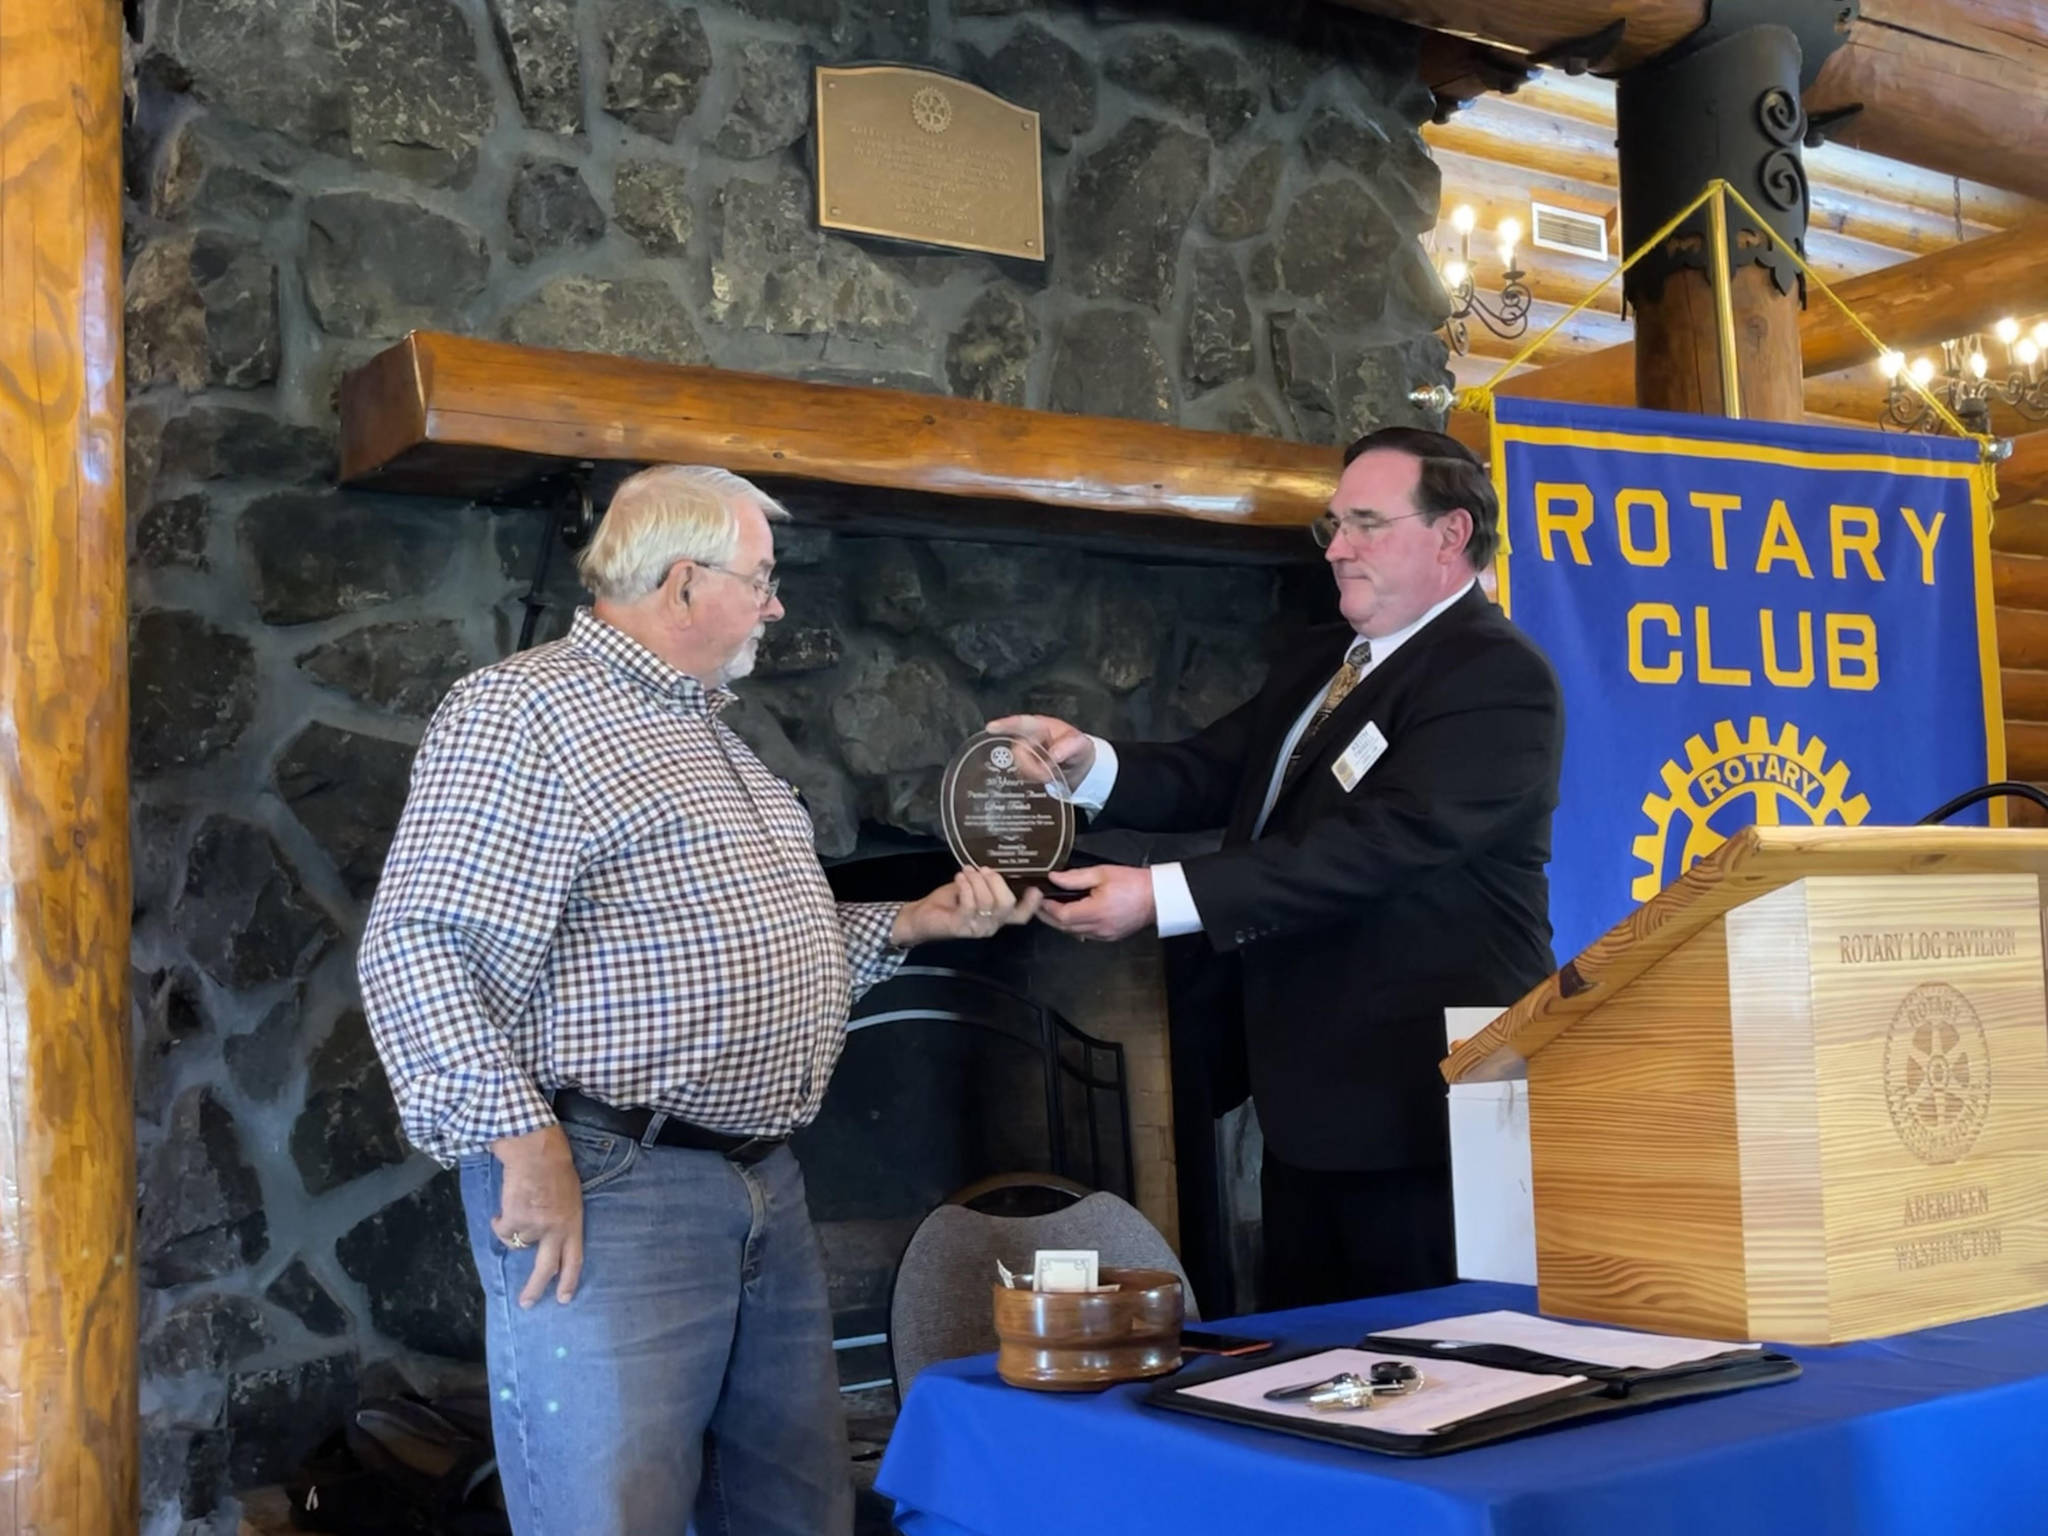 Doug Twibell, left, joined Rotary in 1970.